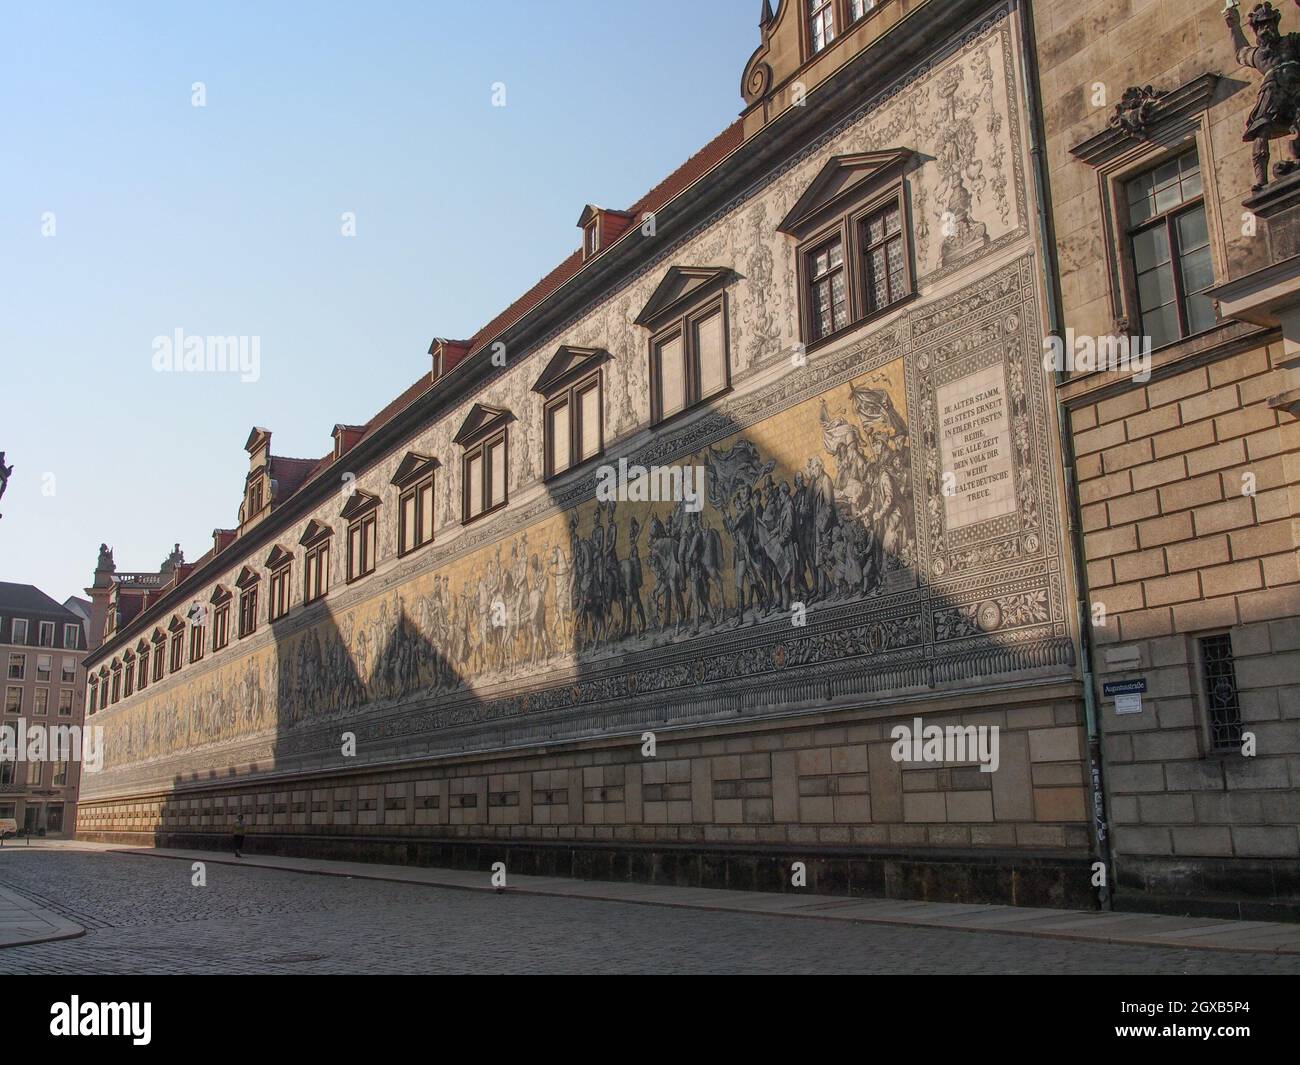 Fuerstenzug meaning Procession of Princes, large mural of a mounted procession of the rulers of Saxony painted in 1871 in Dresden, Germany. Stock Photo